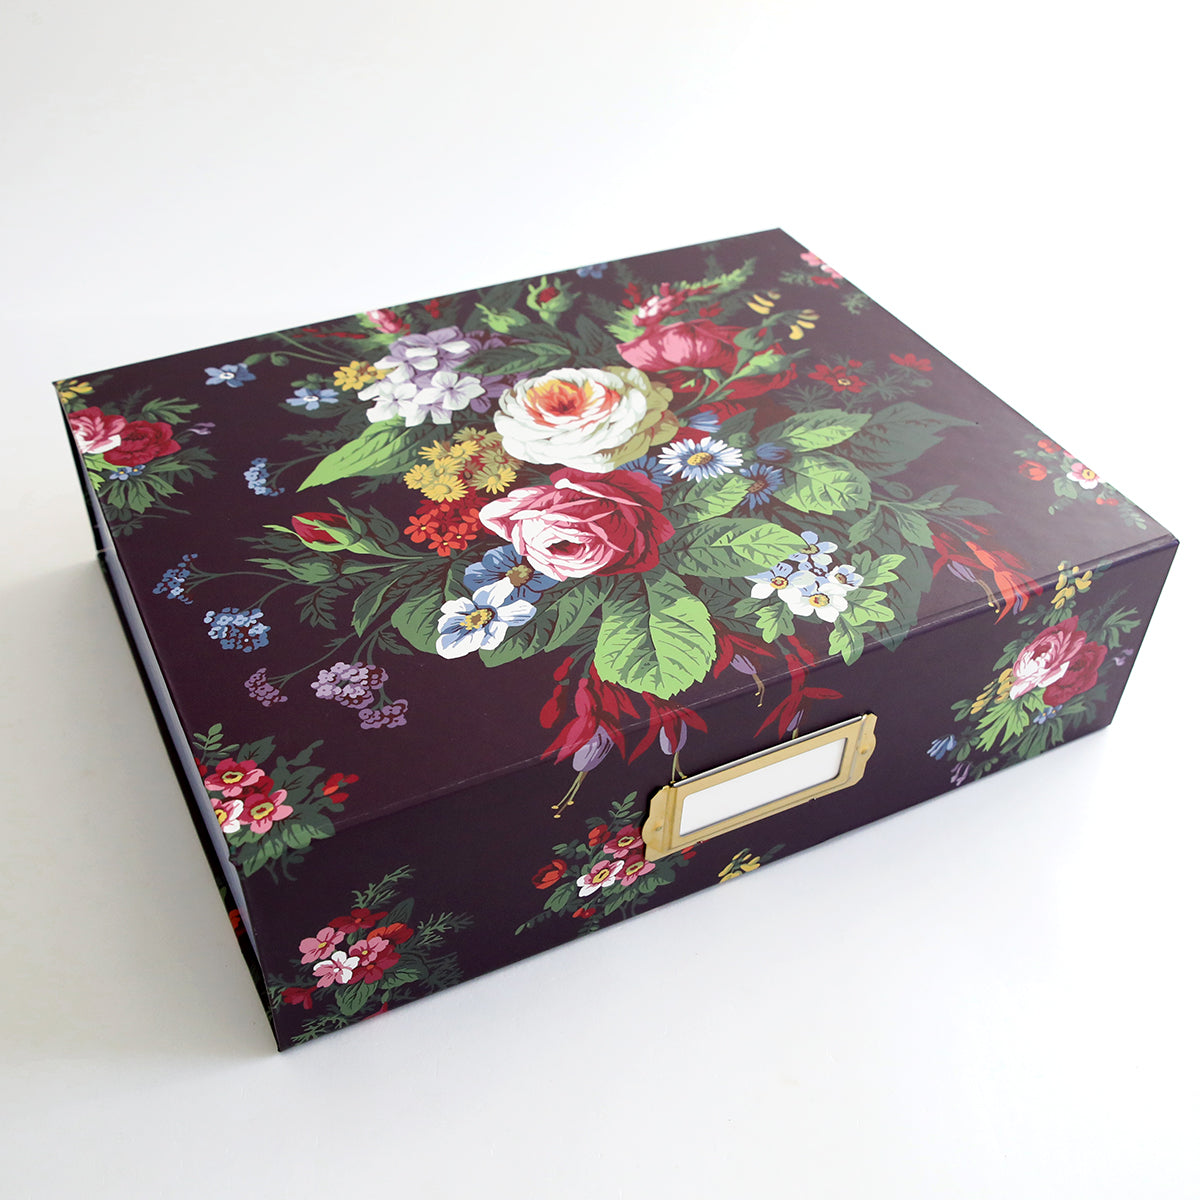 An Embellishment Storage Box - Astrid with a floral pattern.